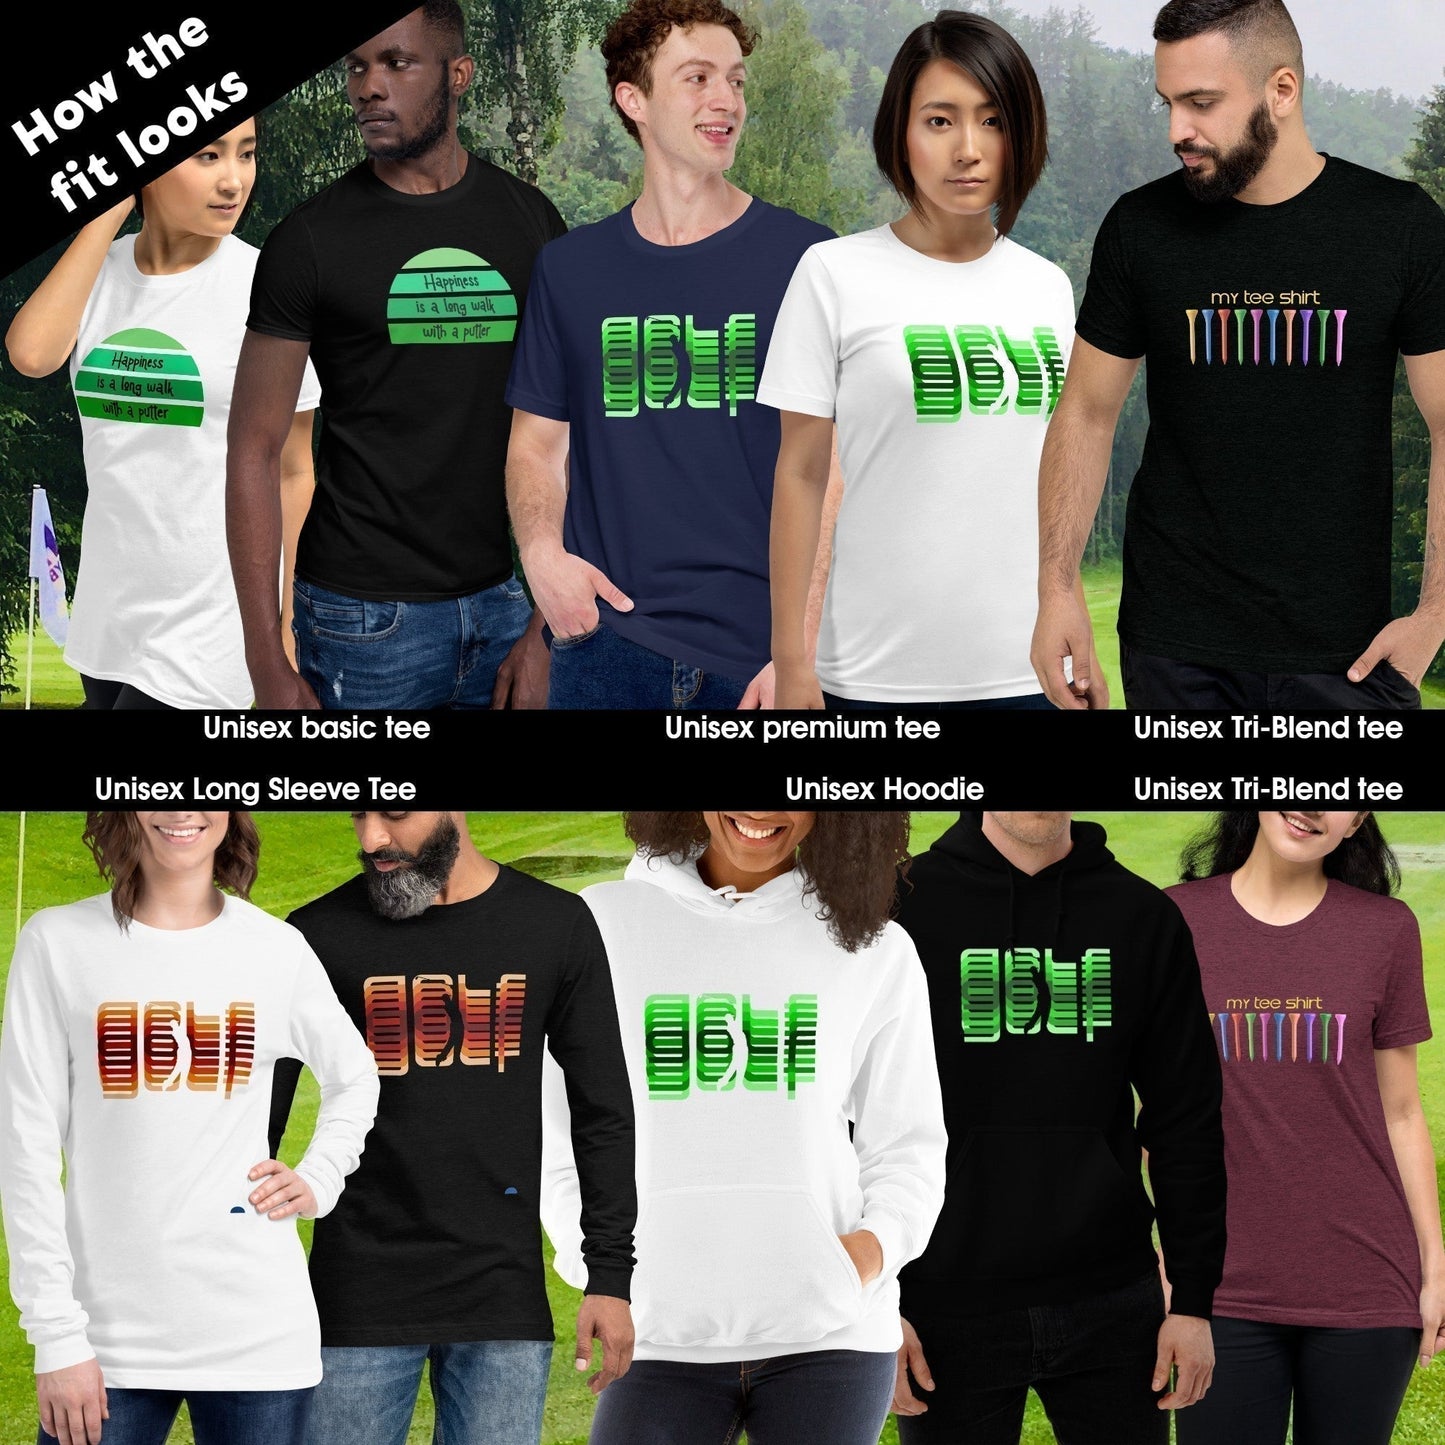 Happiness Golf TShirt and Hoodie is a Creative Golf Graphic design for Men and Women